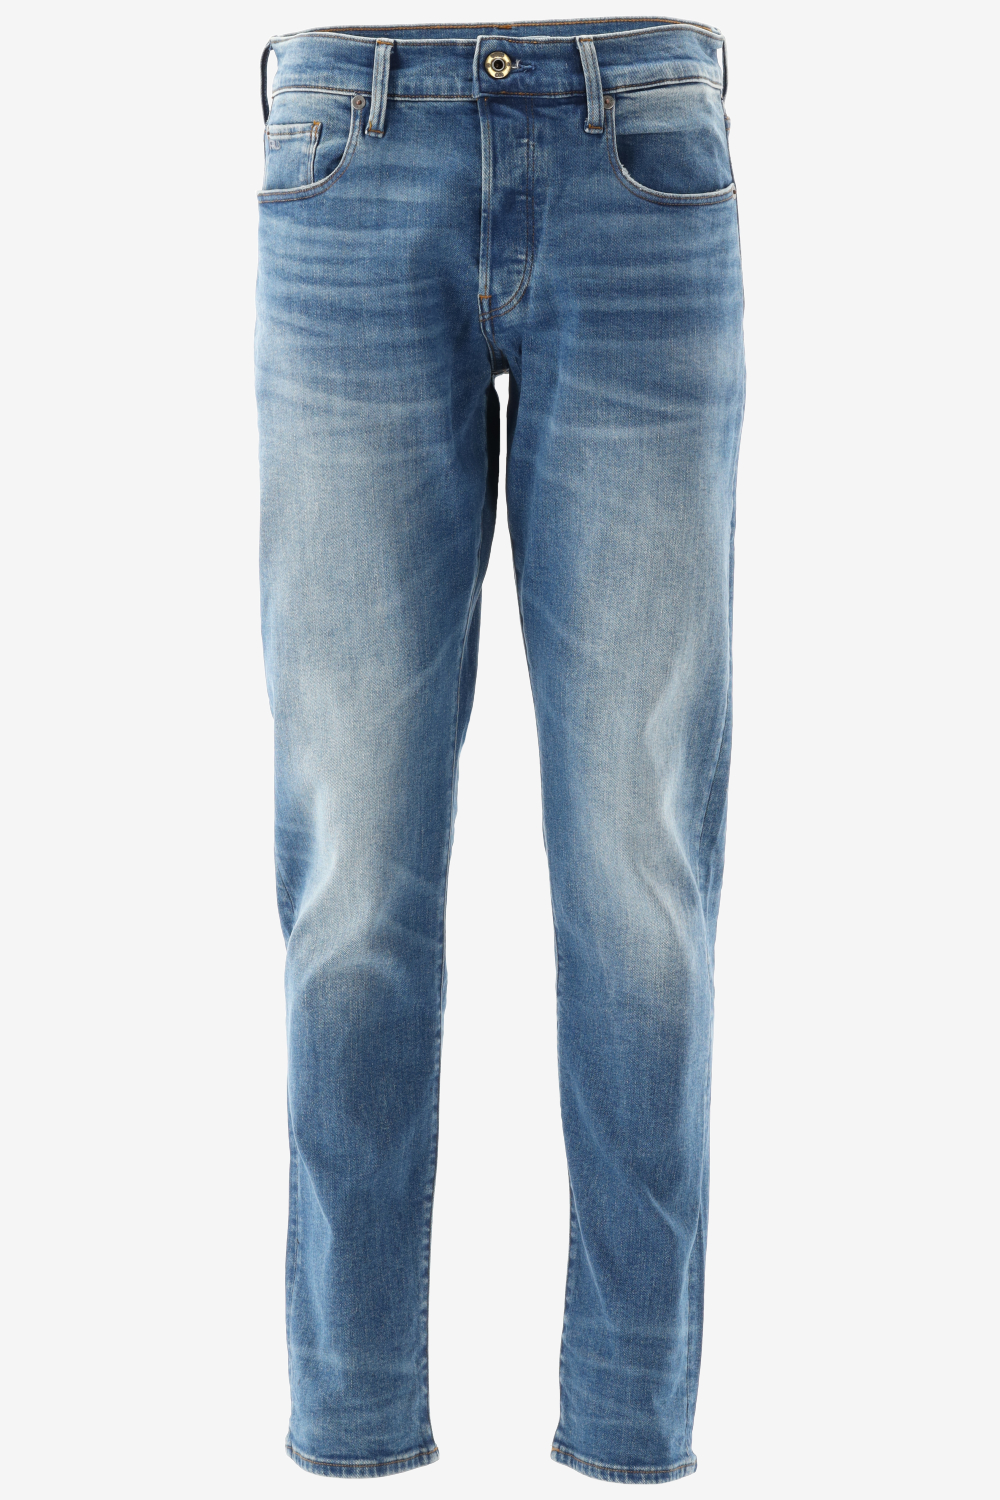 G Star Tapered Fit 3301 REGULAR TAPERED JEANS